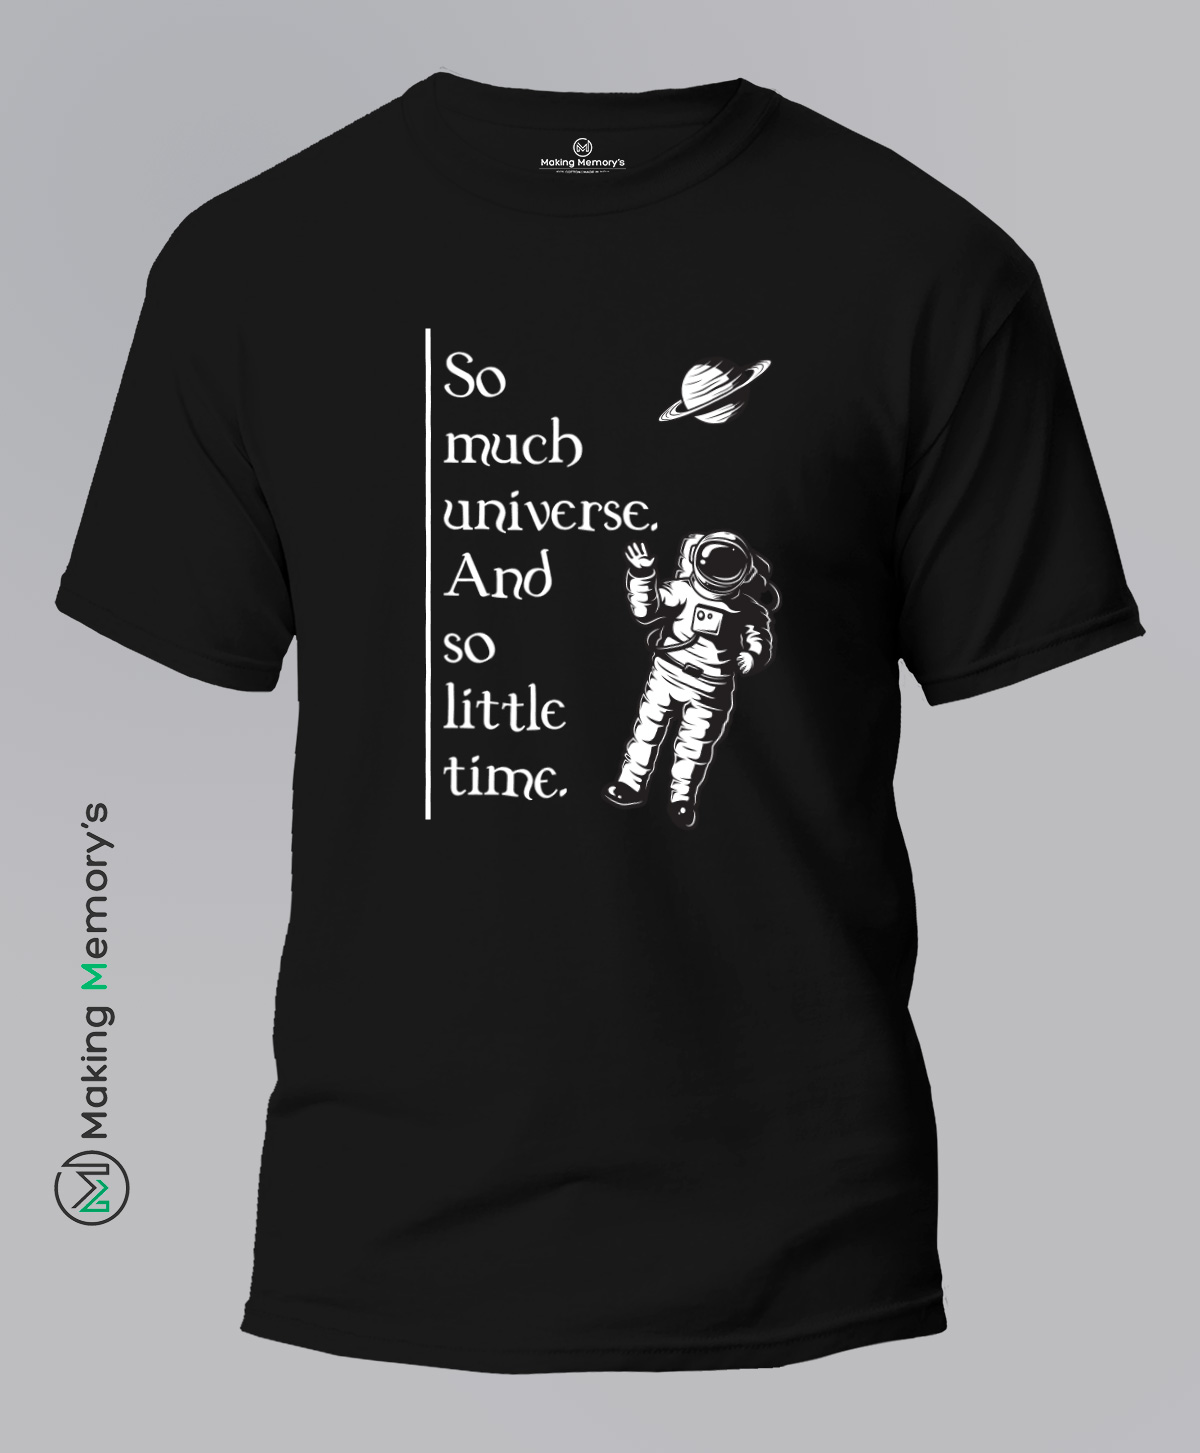 So-much-universe-and-so-little-time-black-t-shirt